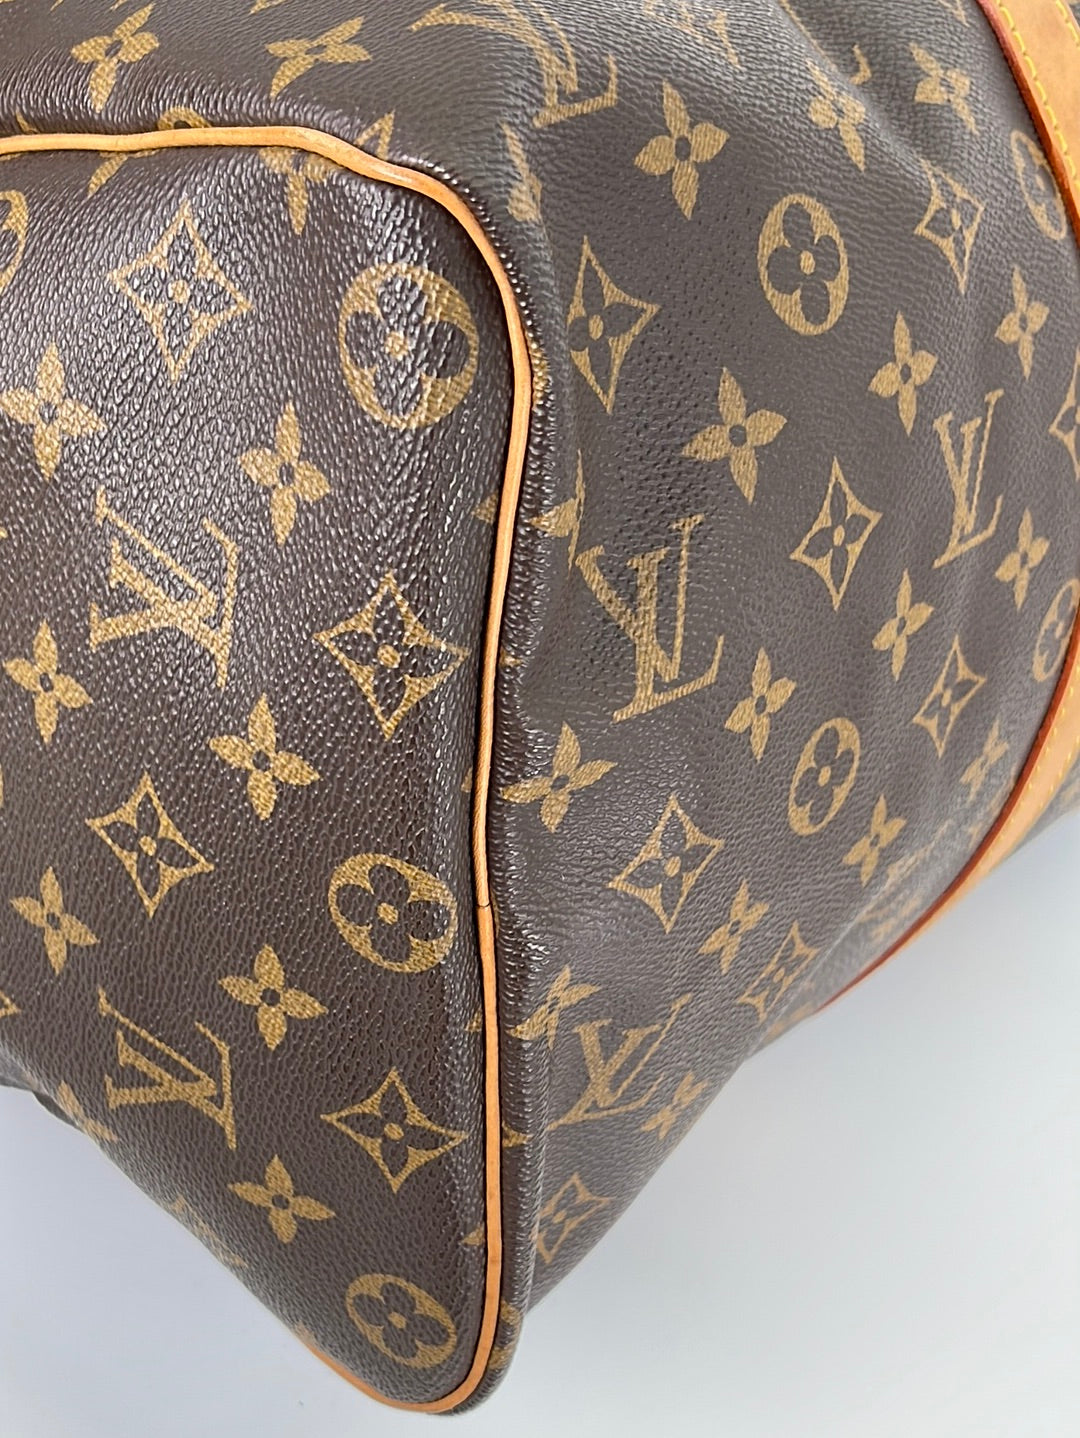 Louis Vuitton Keepall Duffle Bag 45 Monogram Canvas – Coco Approved Studio